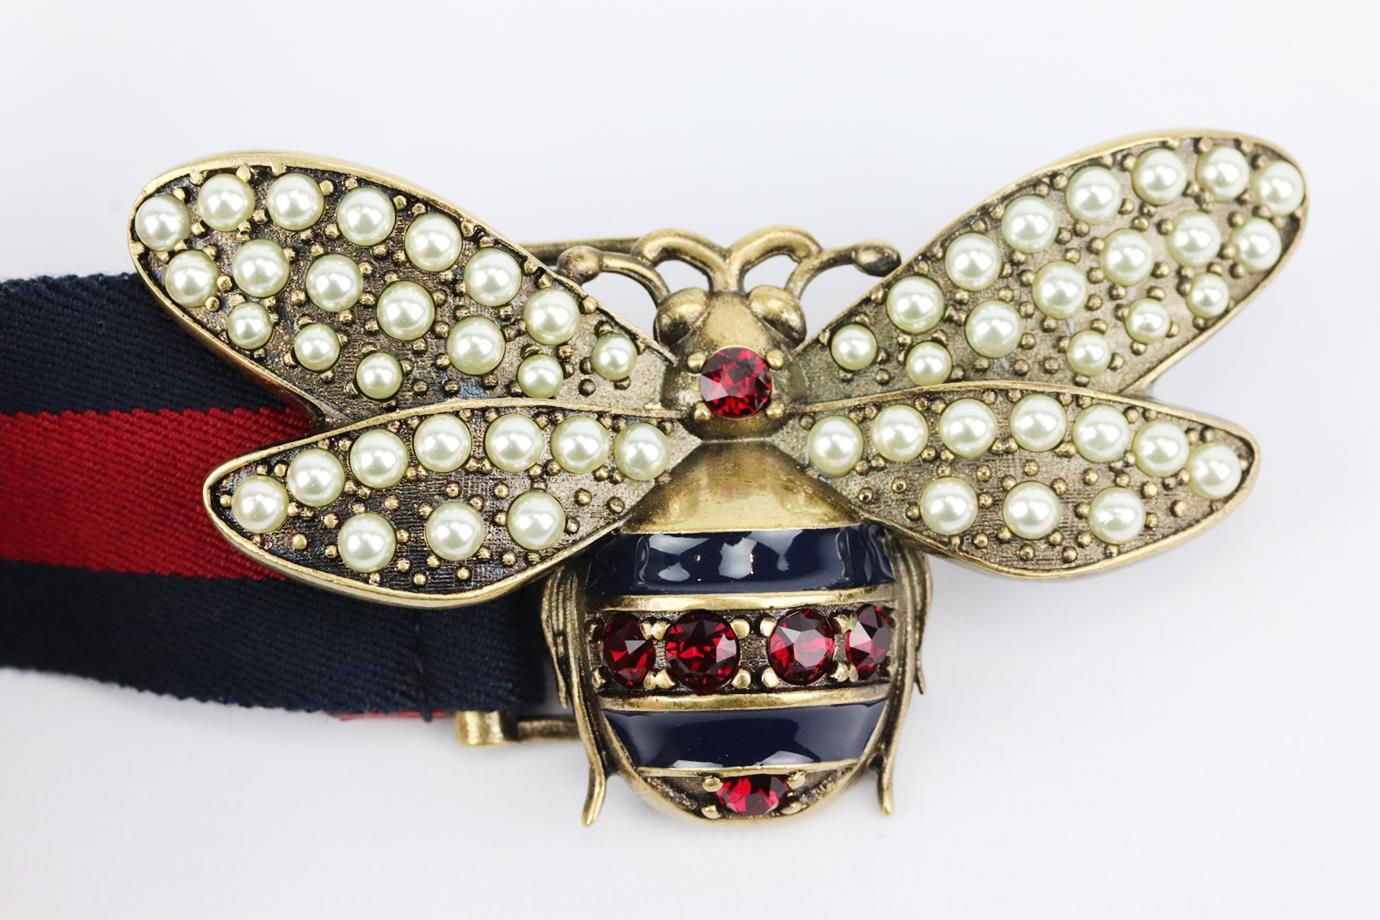 This ‘Queen Margaret’ waist belt by Gucci has been crafted by artisans in the house's Italian atelier, in keeping with tradition, made from striped elasticated band and finished with embellished gold-tone bee clasp at the front. Navy and red